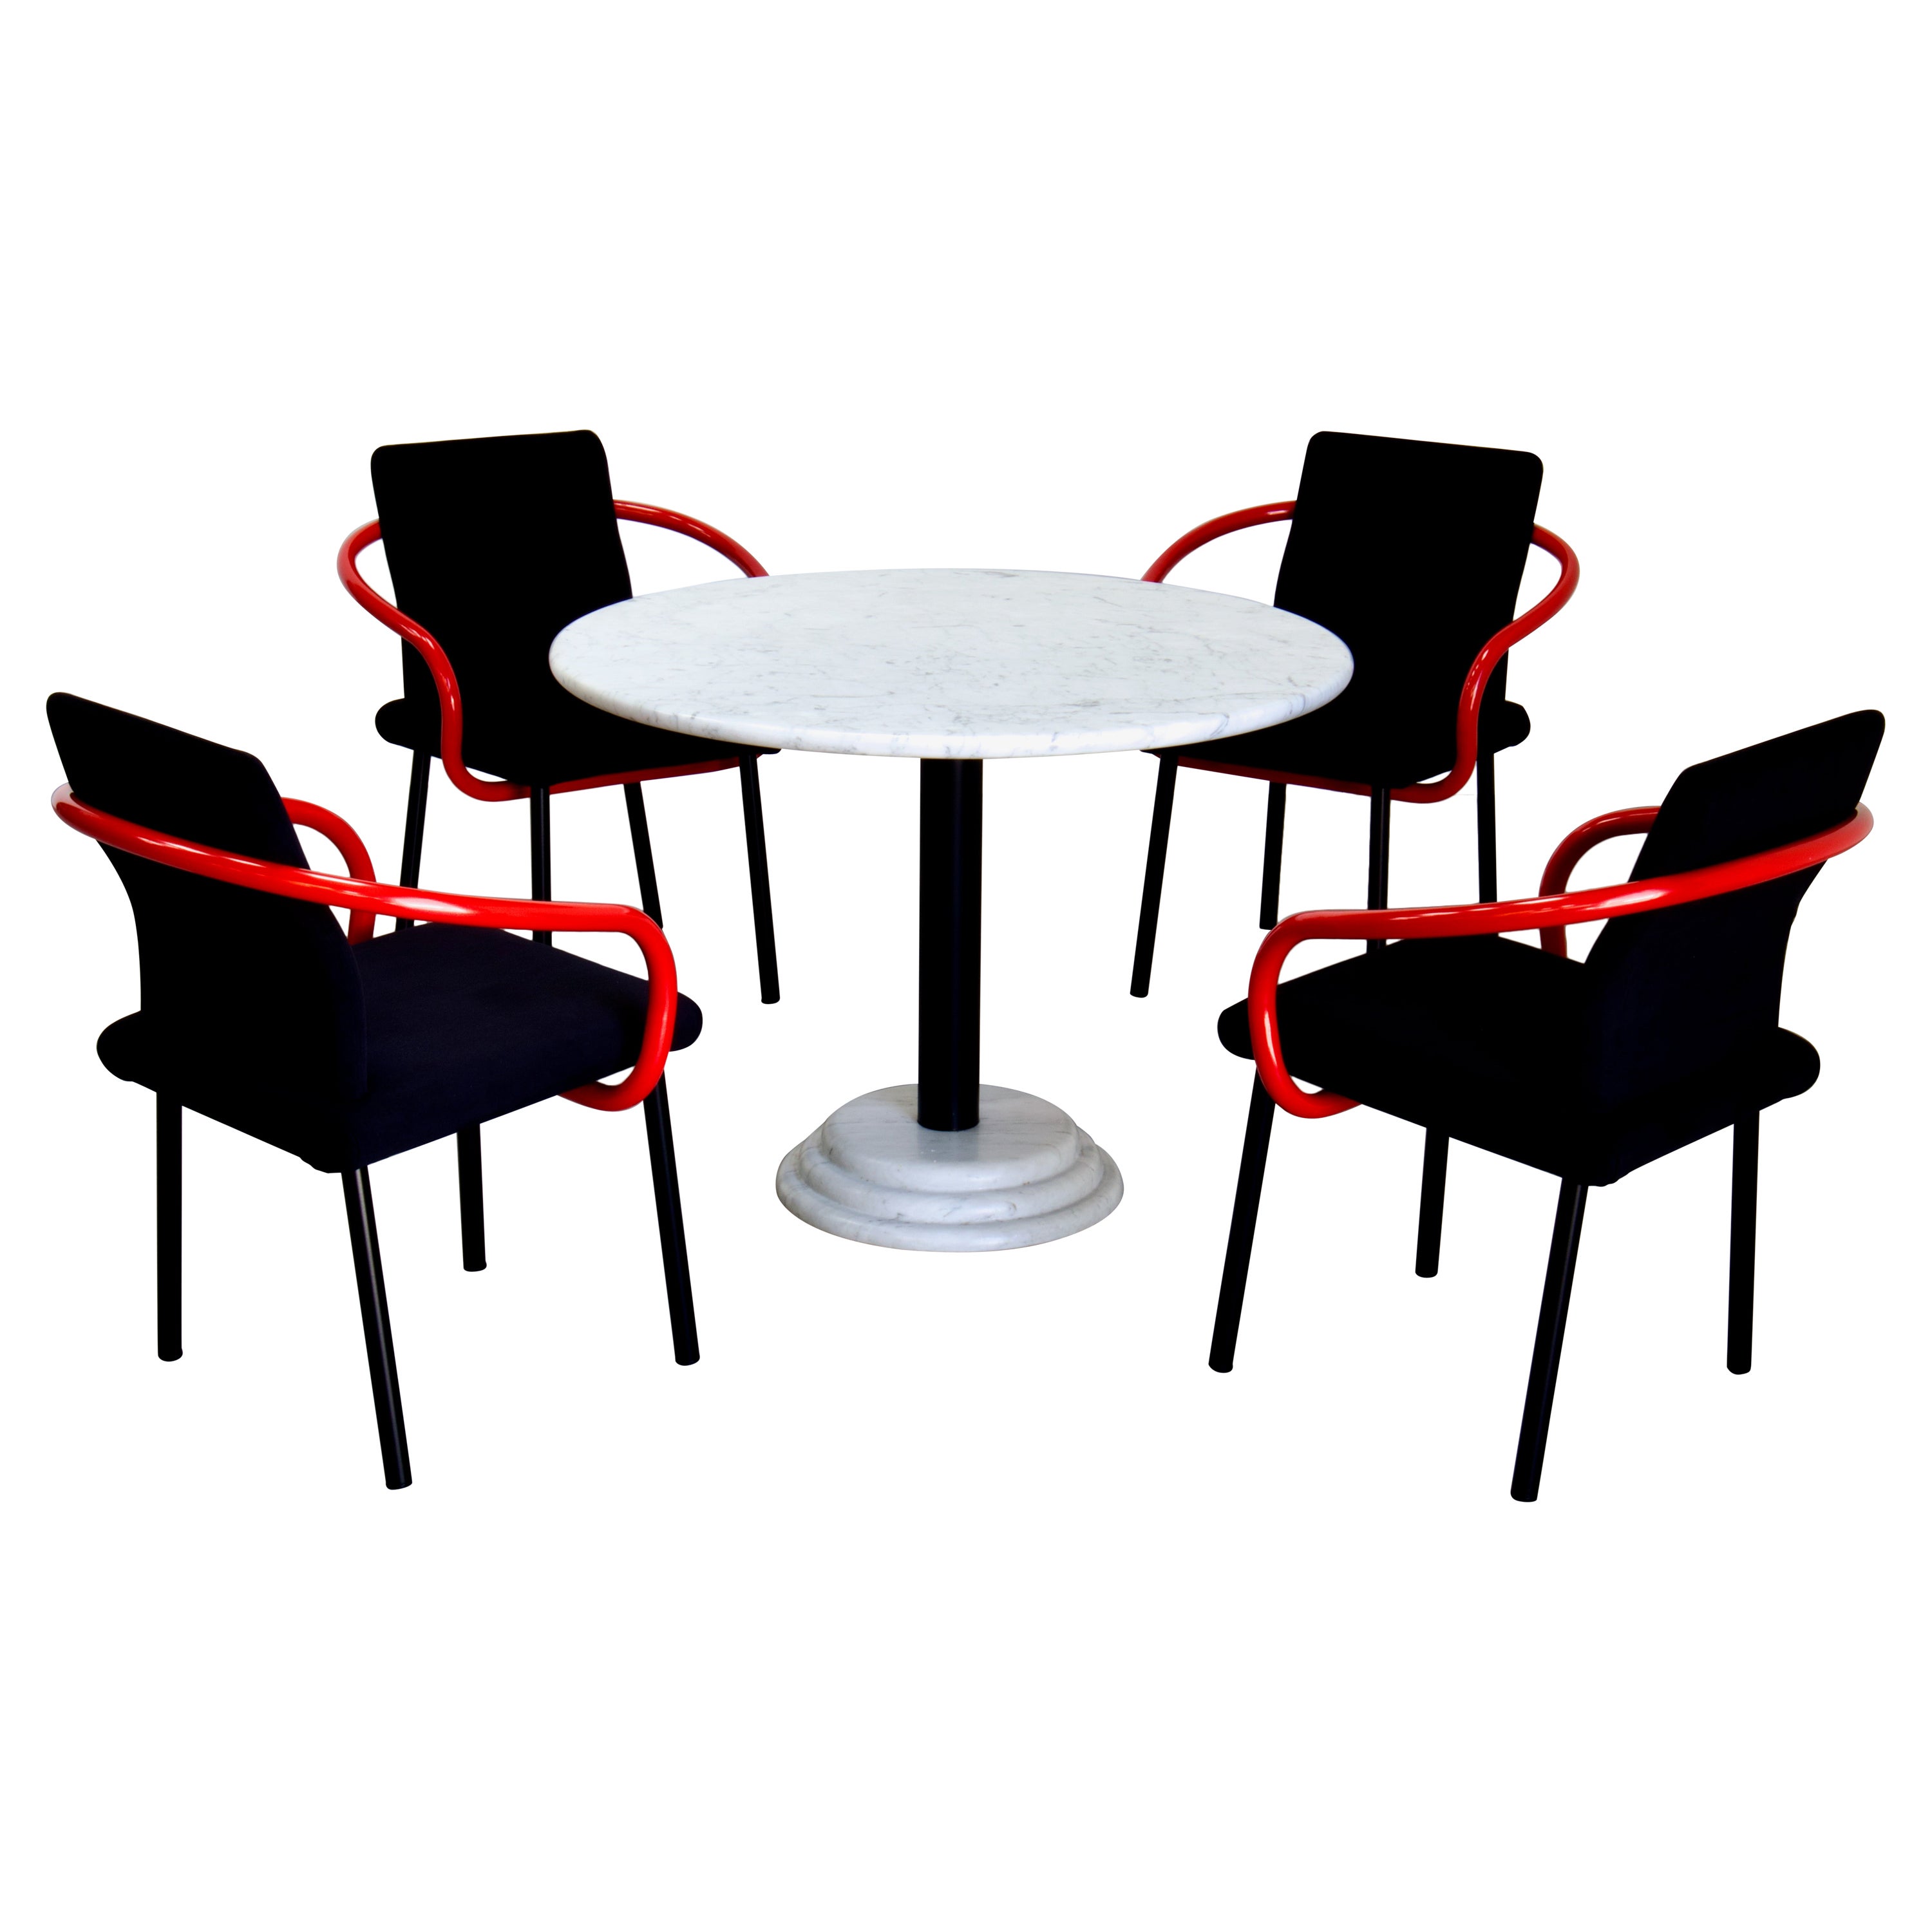 Ettore Sottsass Mandarin Dining Set in Carrara Marble, Red & Black, 1986 Italy For Sale